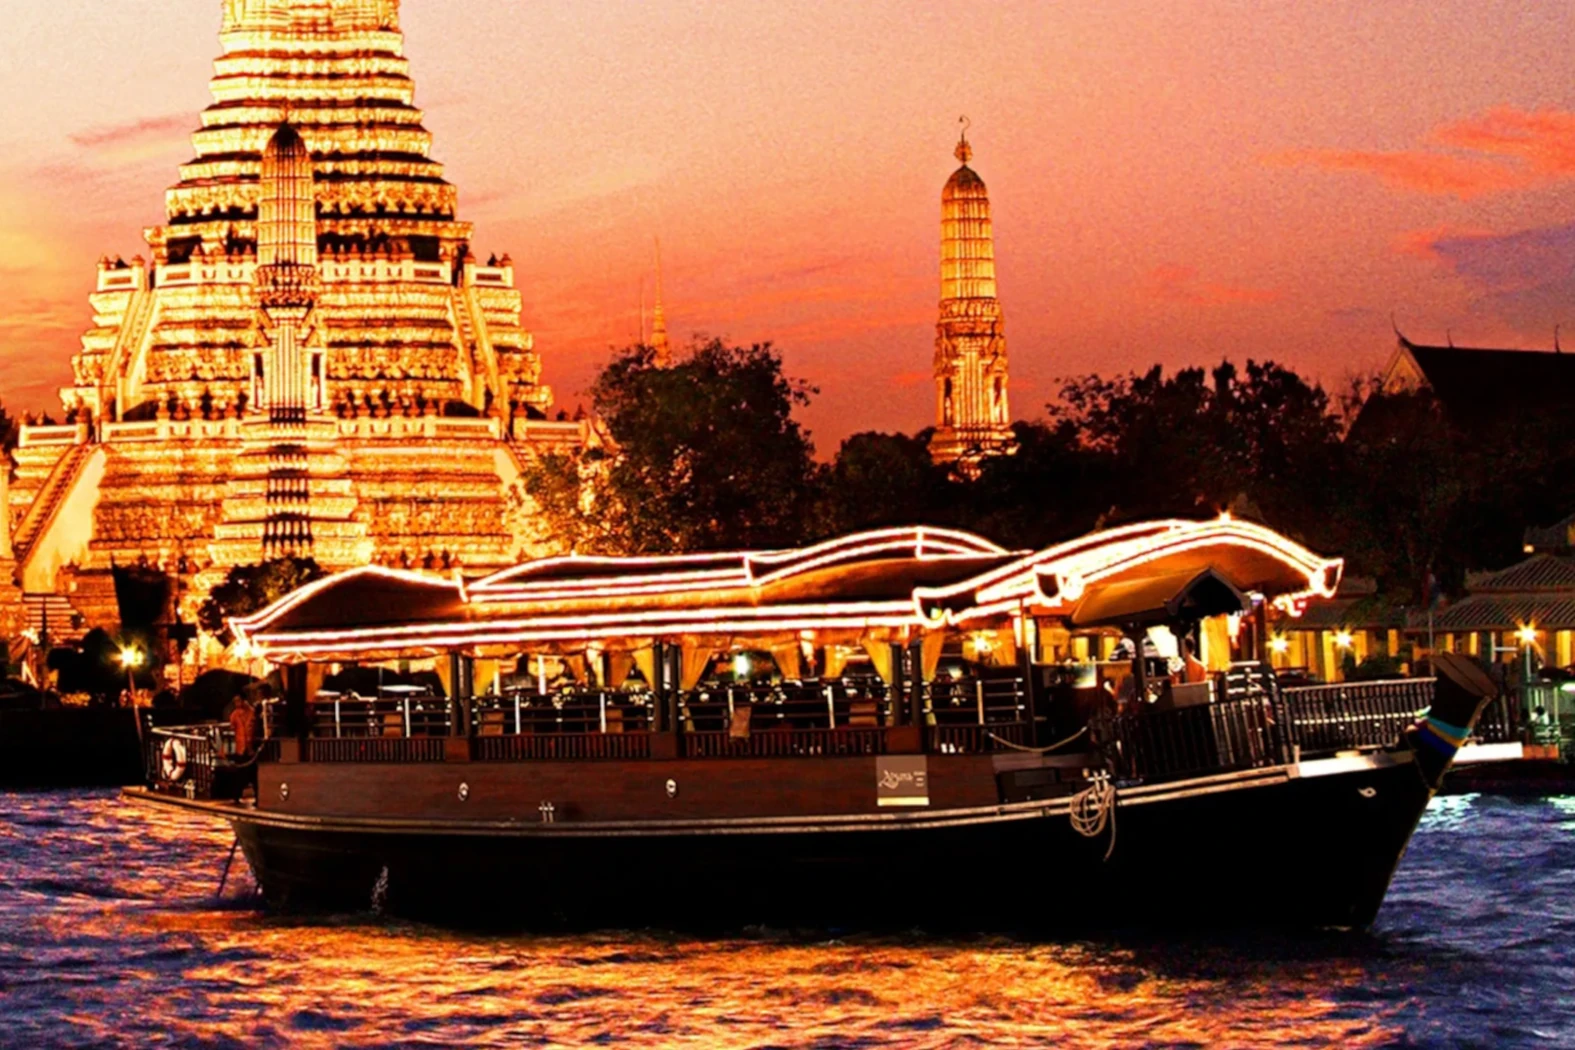 Night view of a temple and the boat of Apsara during a dinner cruise on the river in Bangkok.